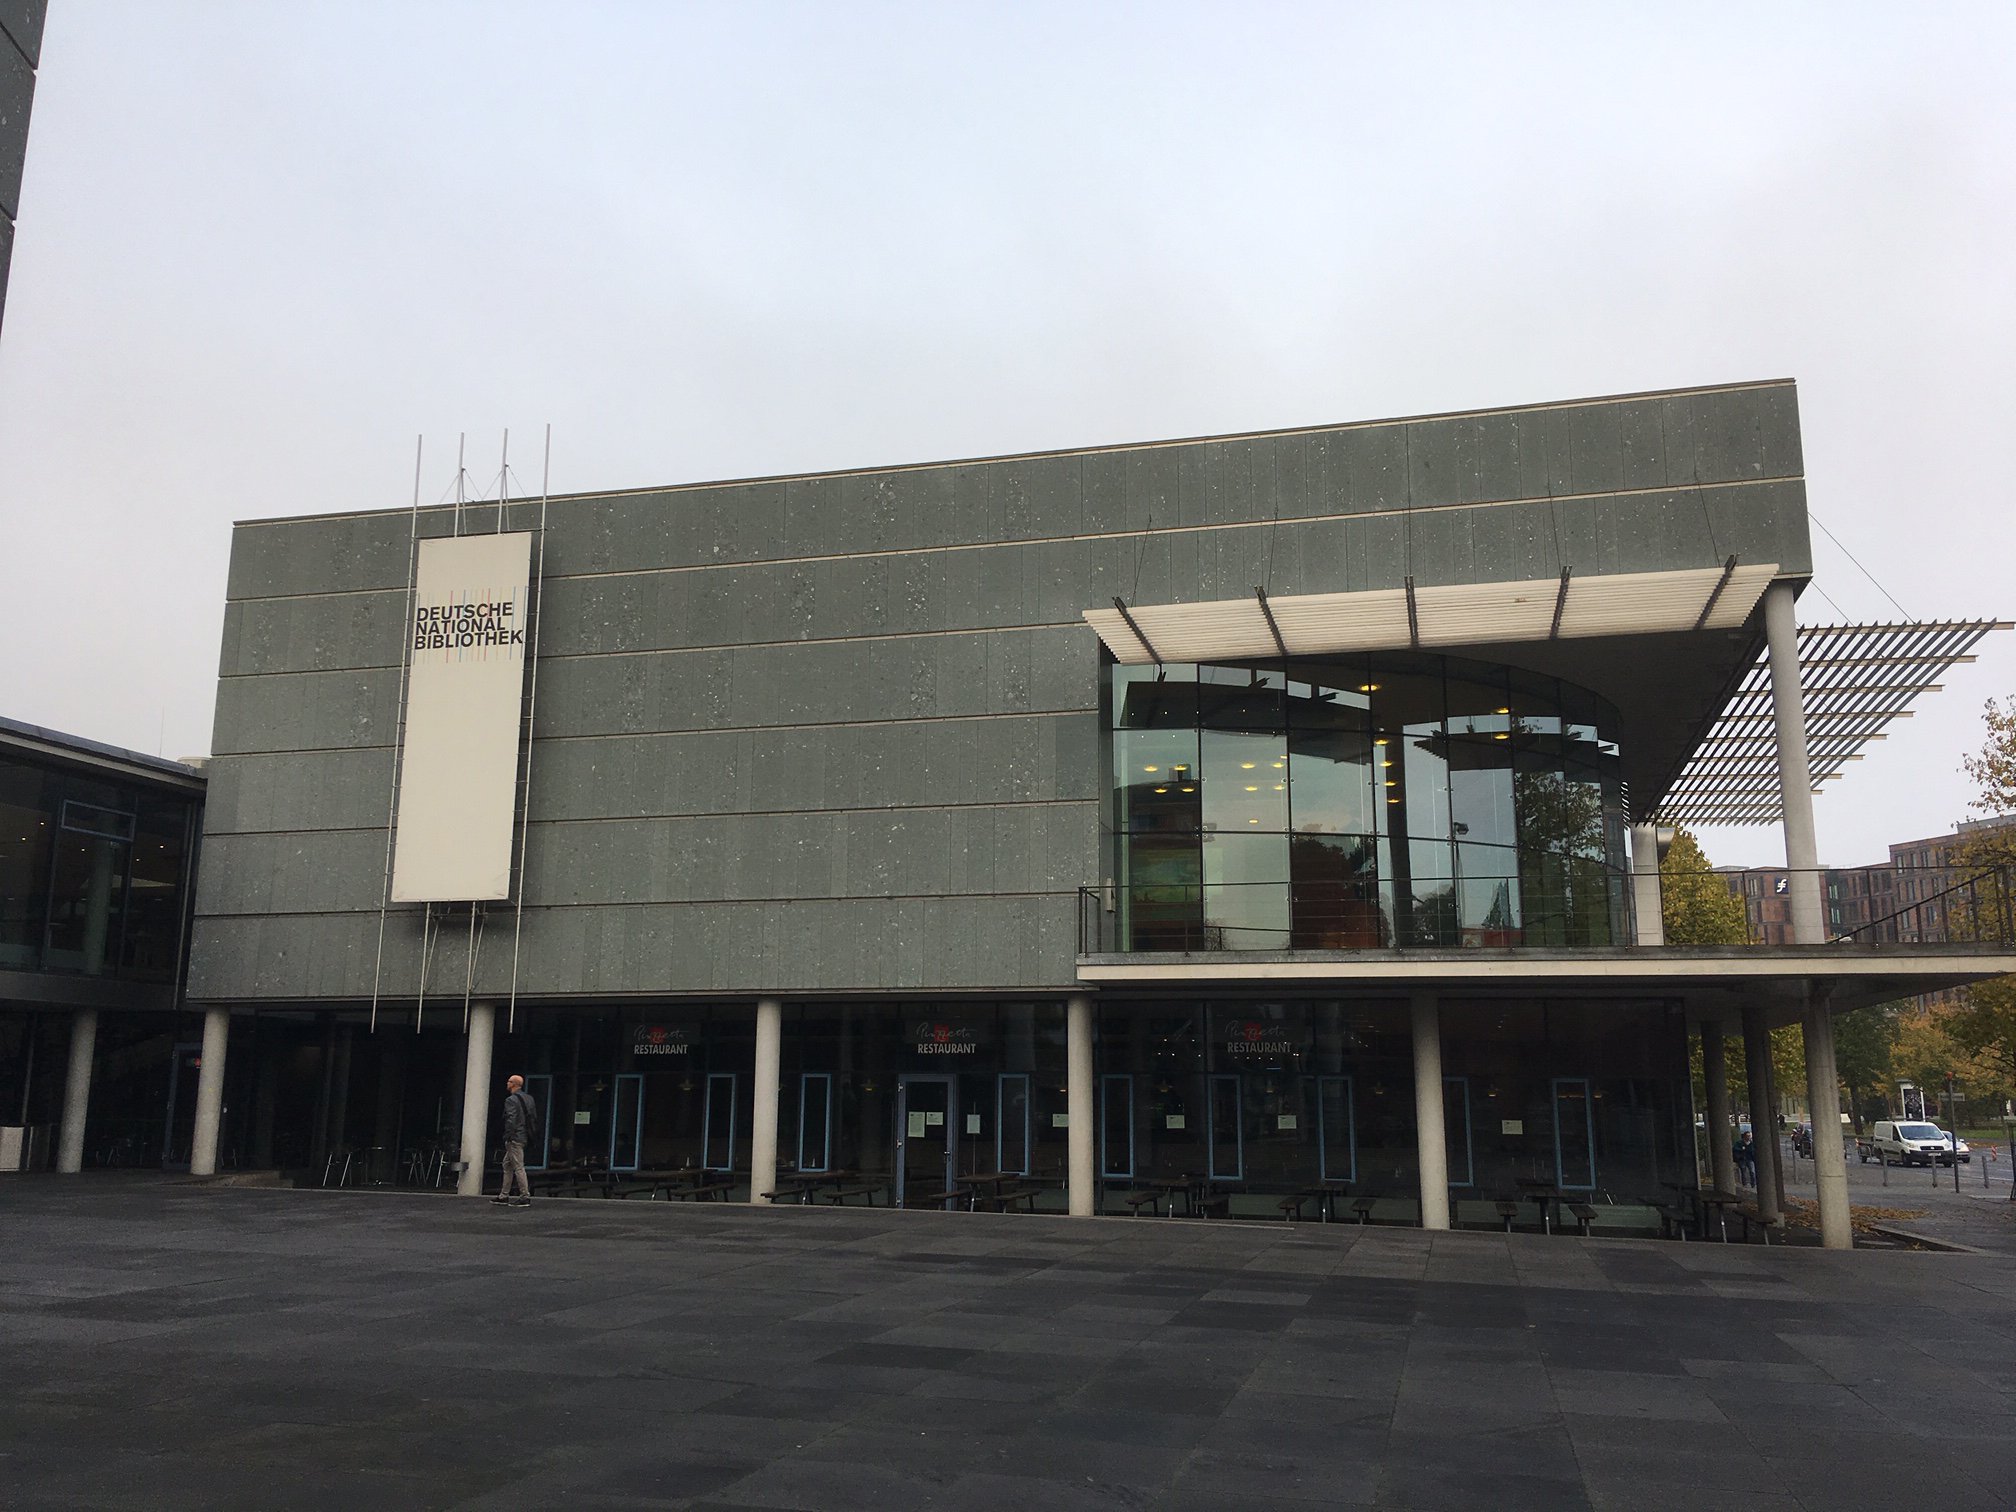 The German National Library, where the New Directions for Libraries, Scholars, and Partnerships symposium was held.